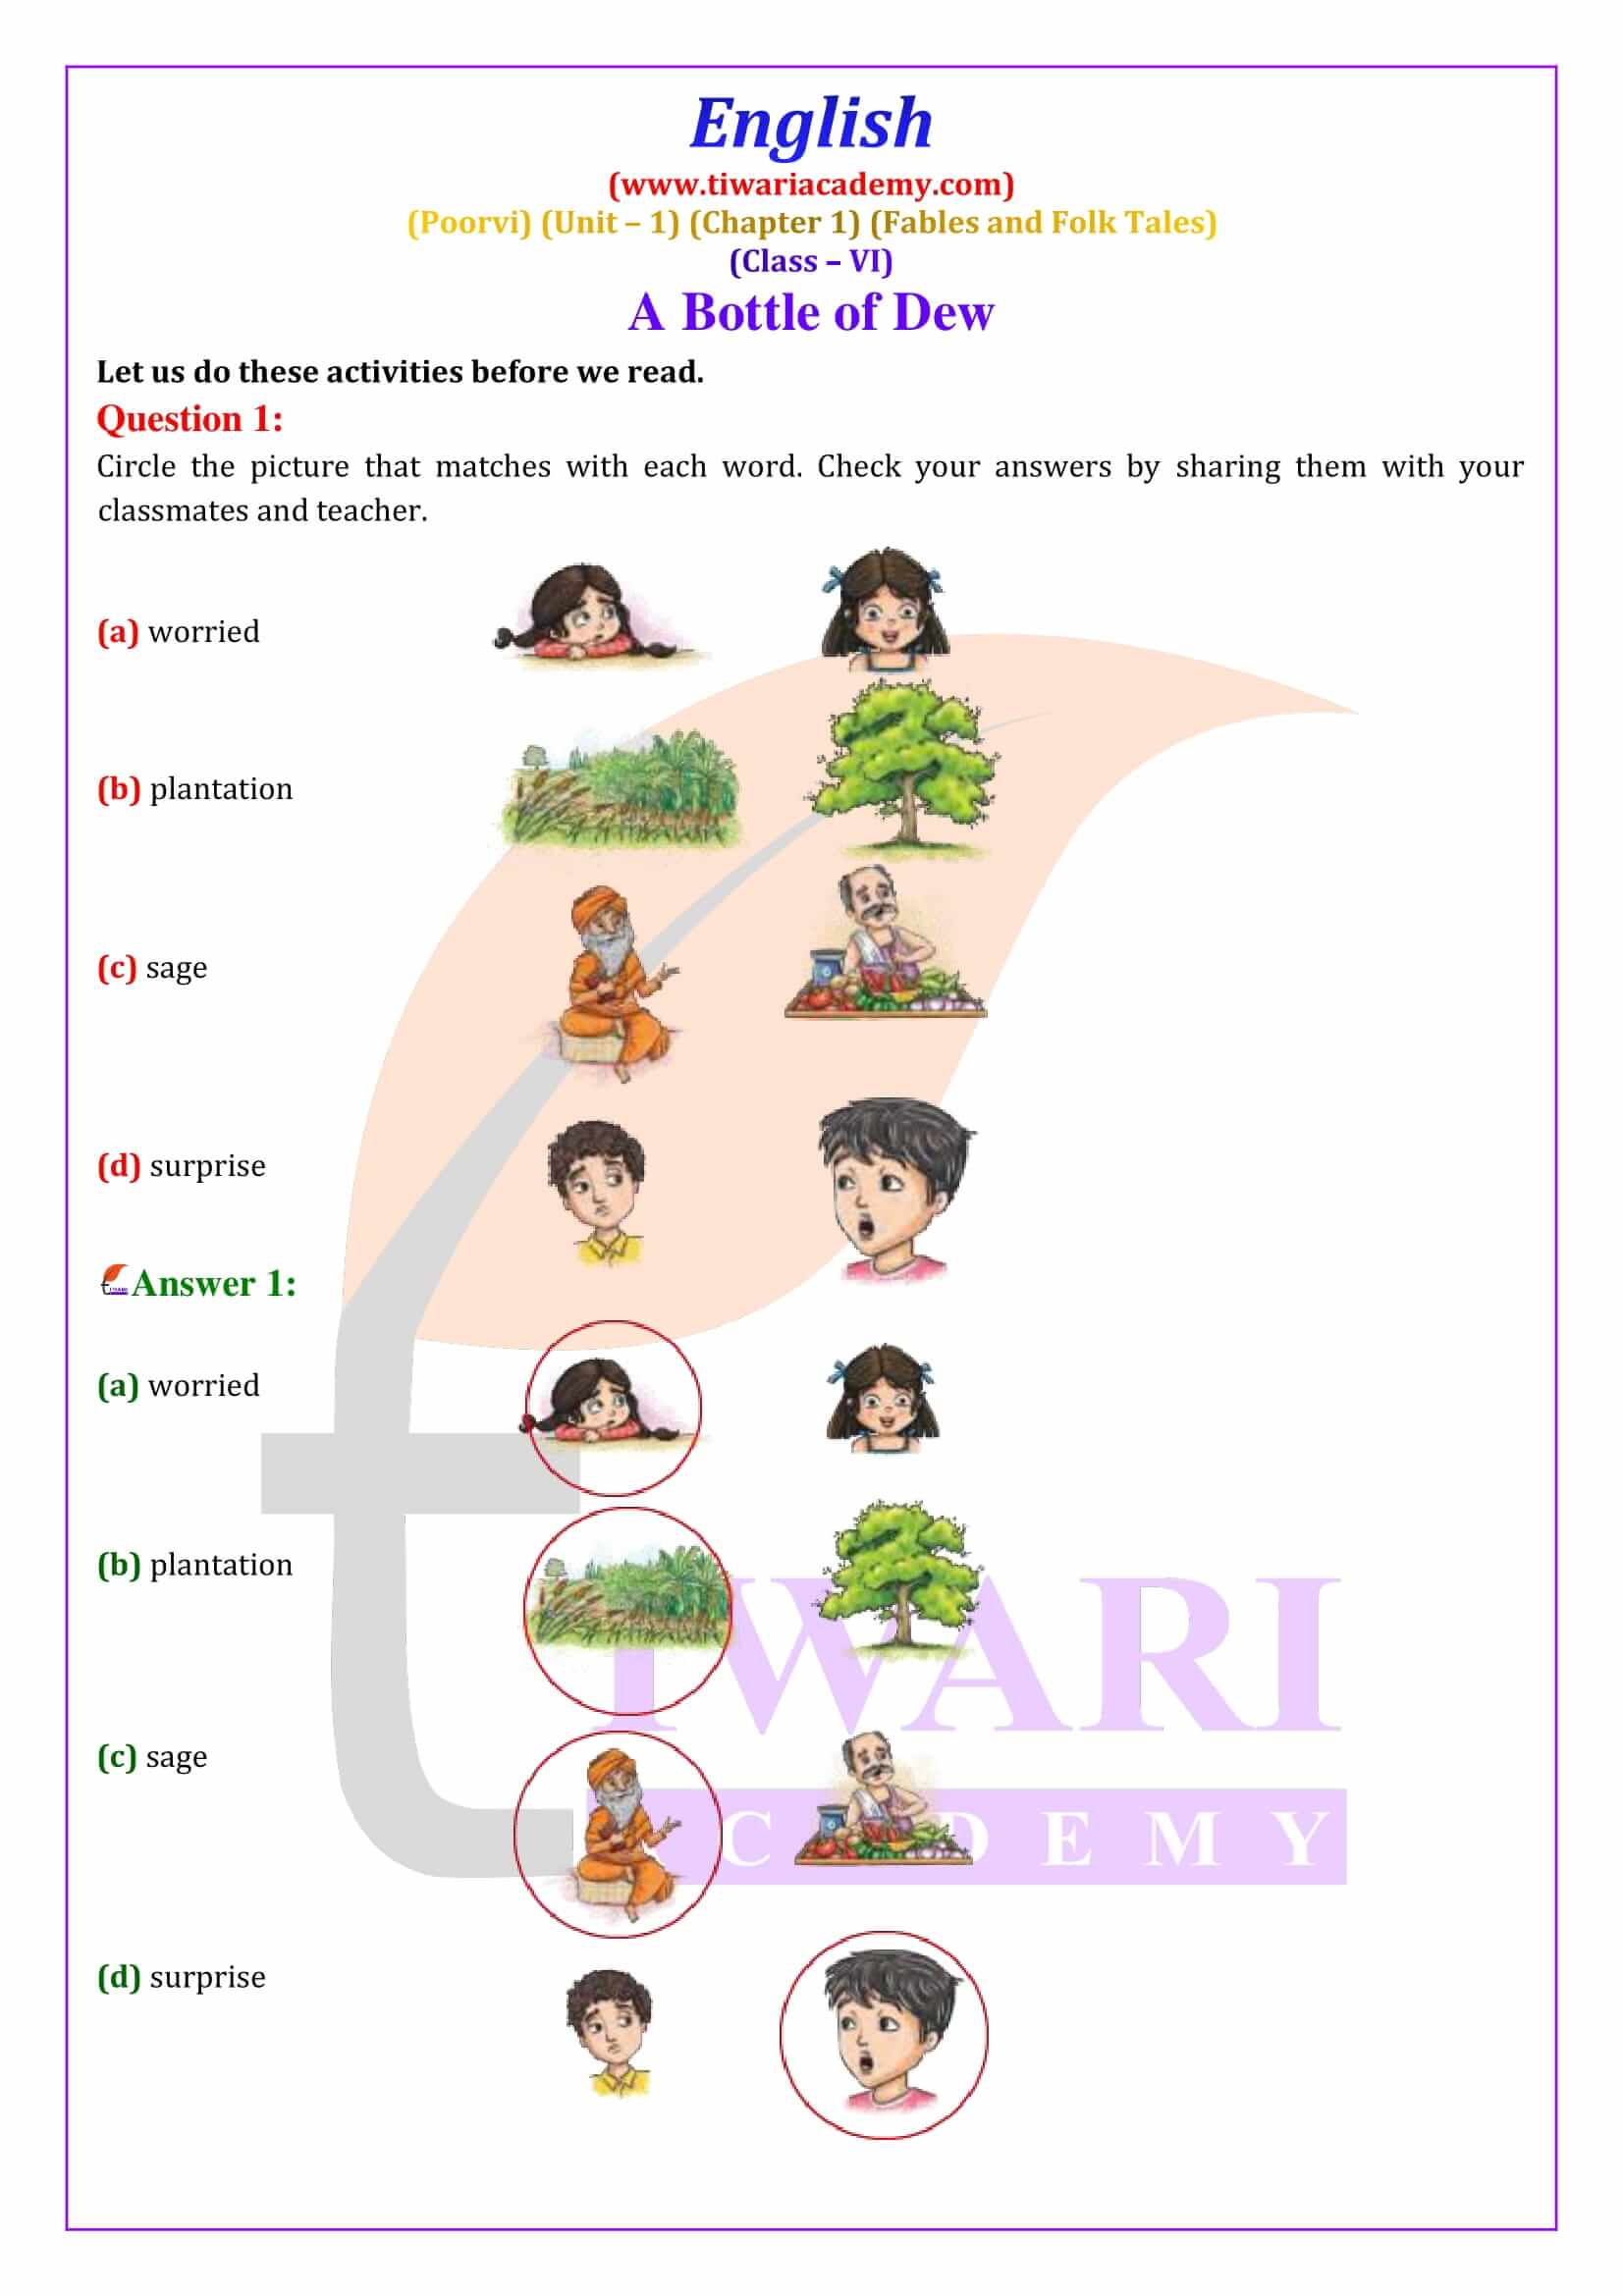 NCERT Solutions for Class 6 English Poorvi Unit 1 Fables and Folk Tales Chapter 1 A Bottle of Dew